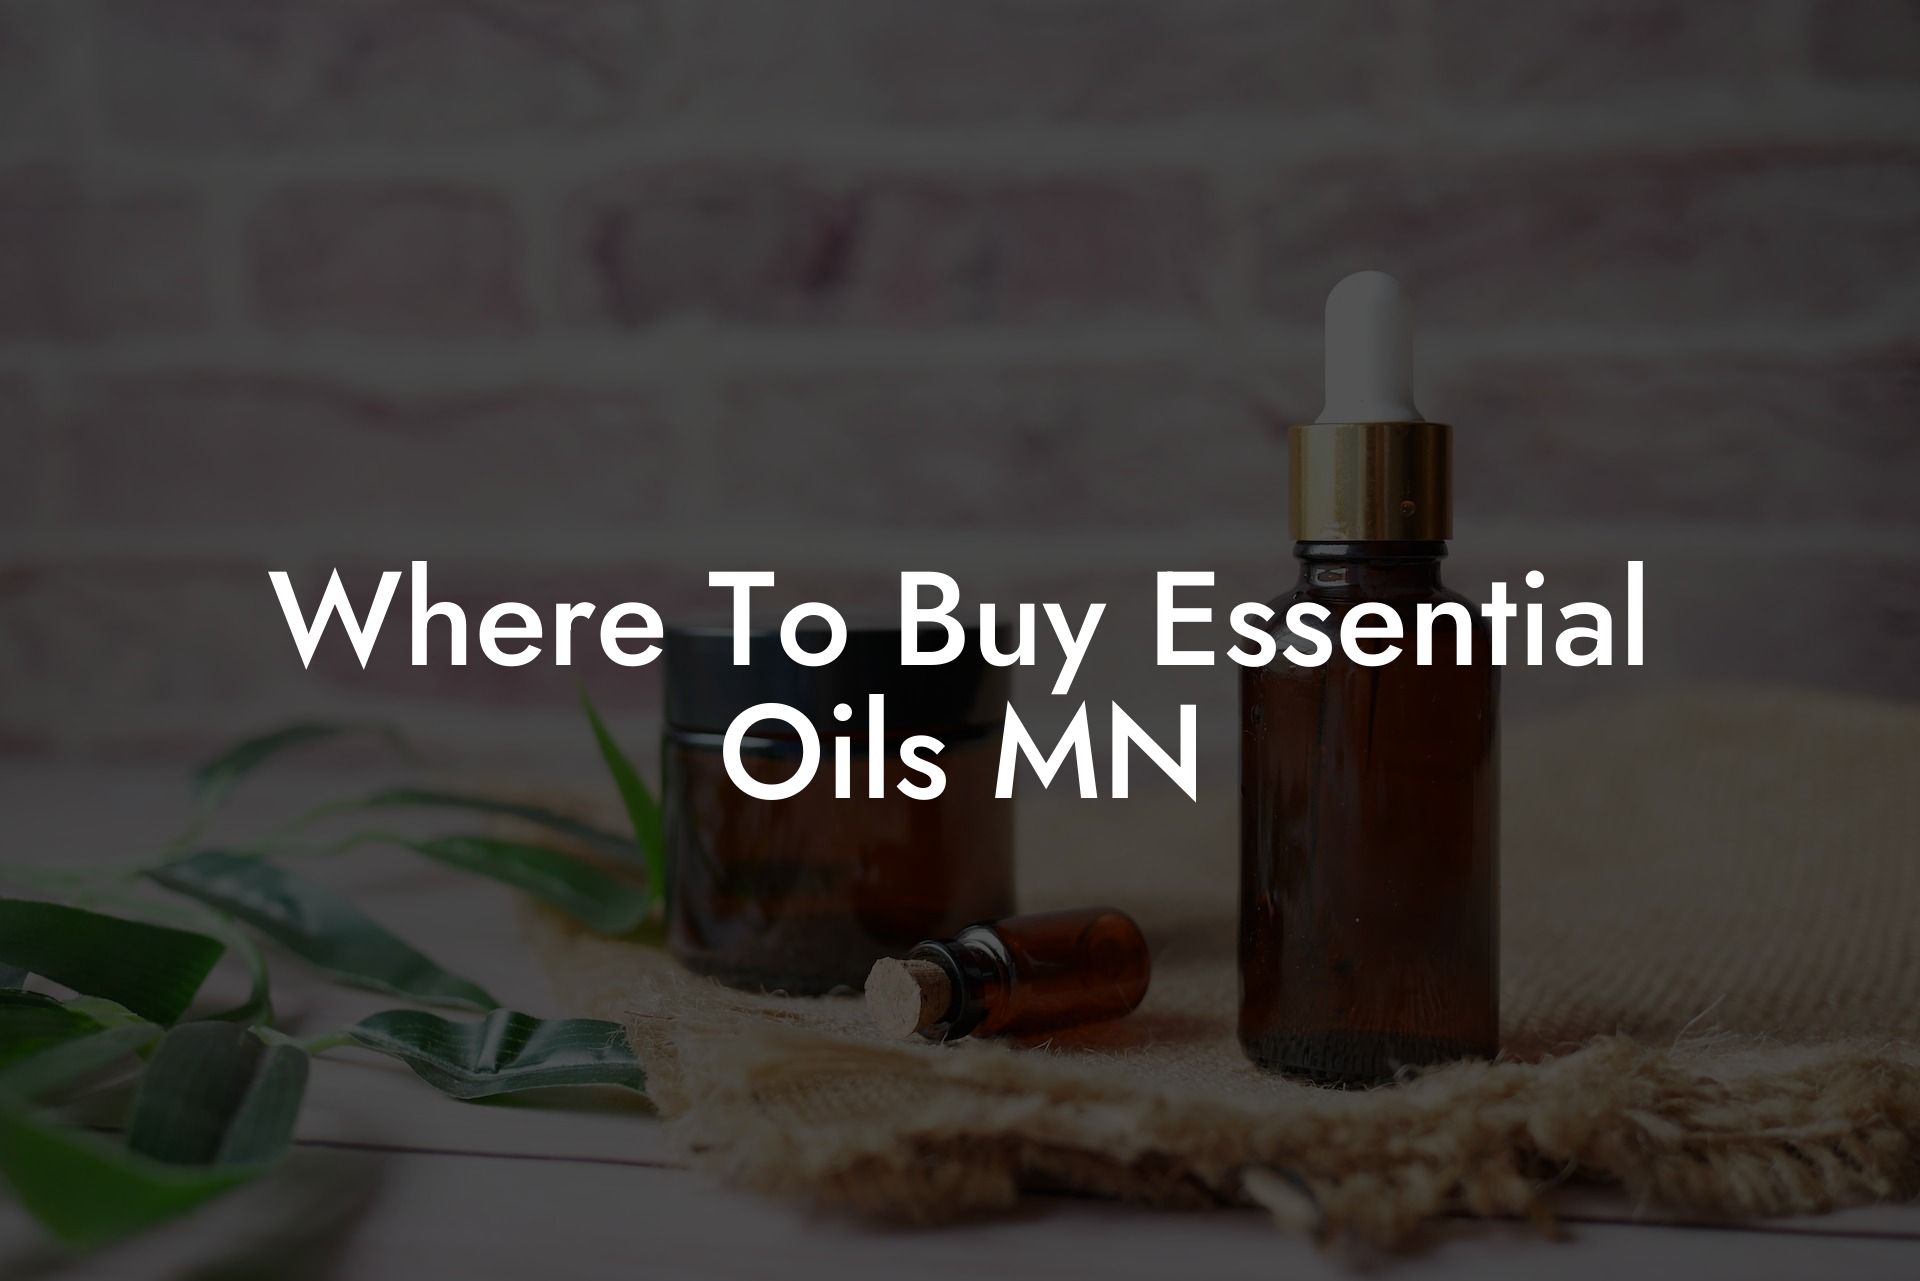 Where To Buy Essential Oils MN